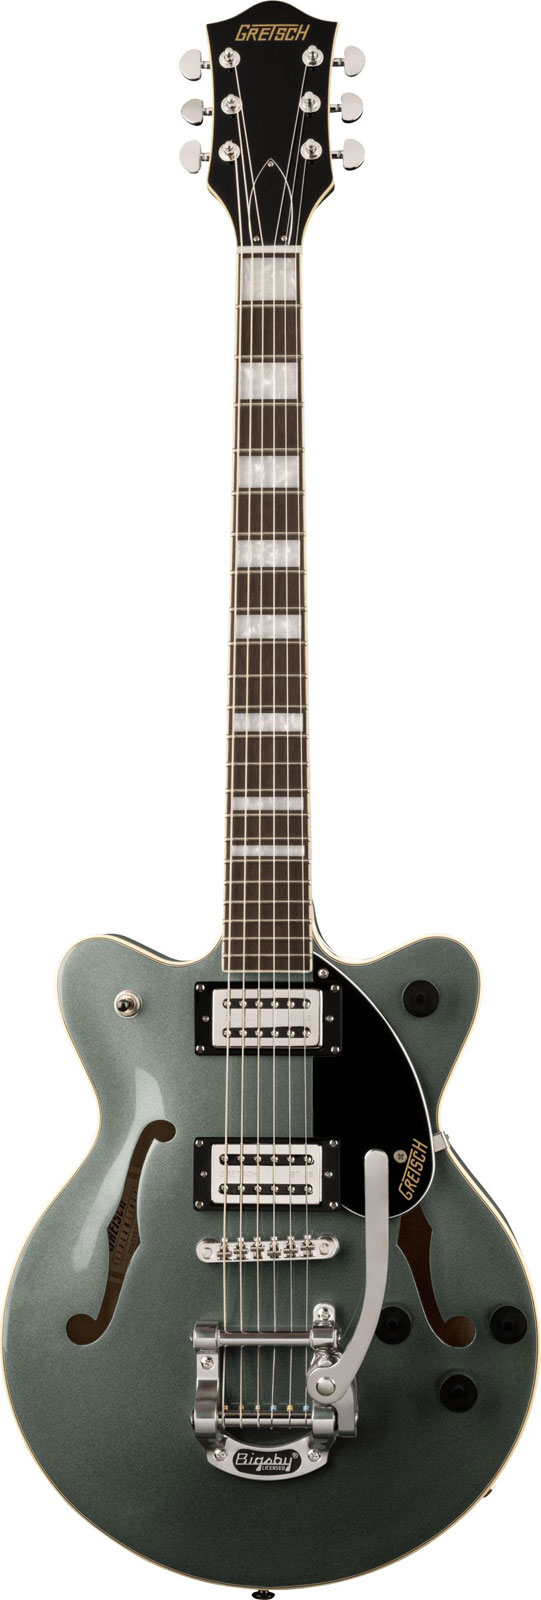 GRETSCH GUITARS G2655T STREAMLINER CENTER BLOCK JR. DOUBLE-CUT WITH BIGSBY LRL STIRLING GREEN